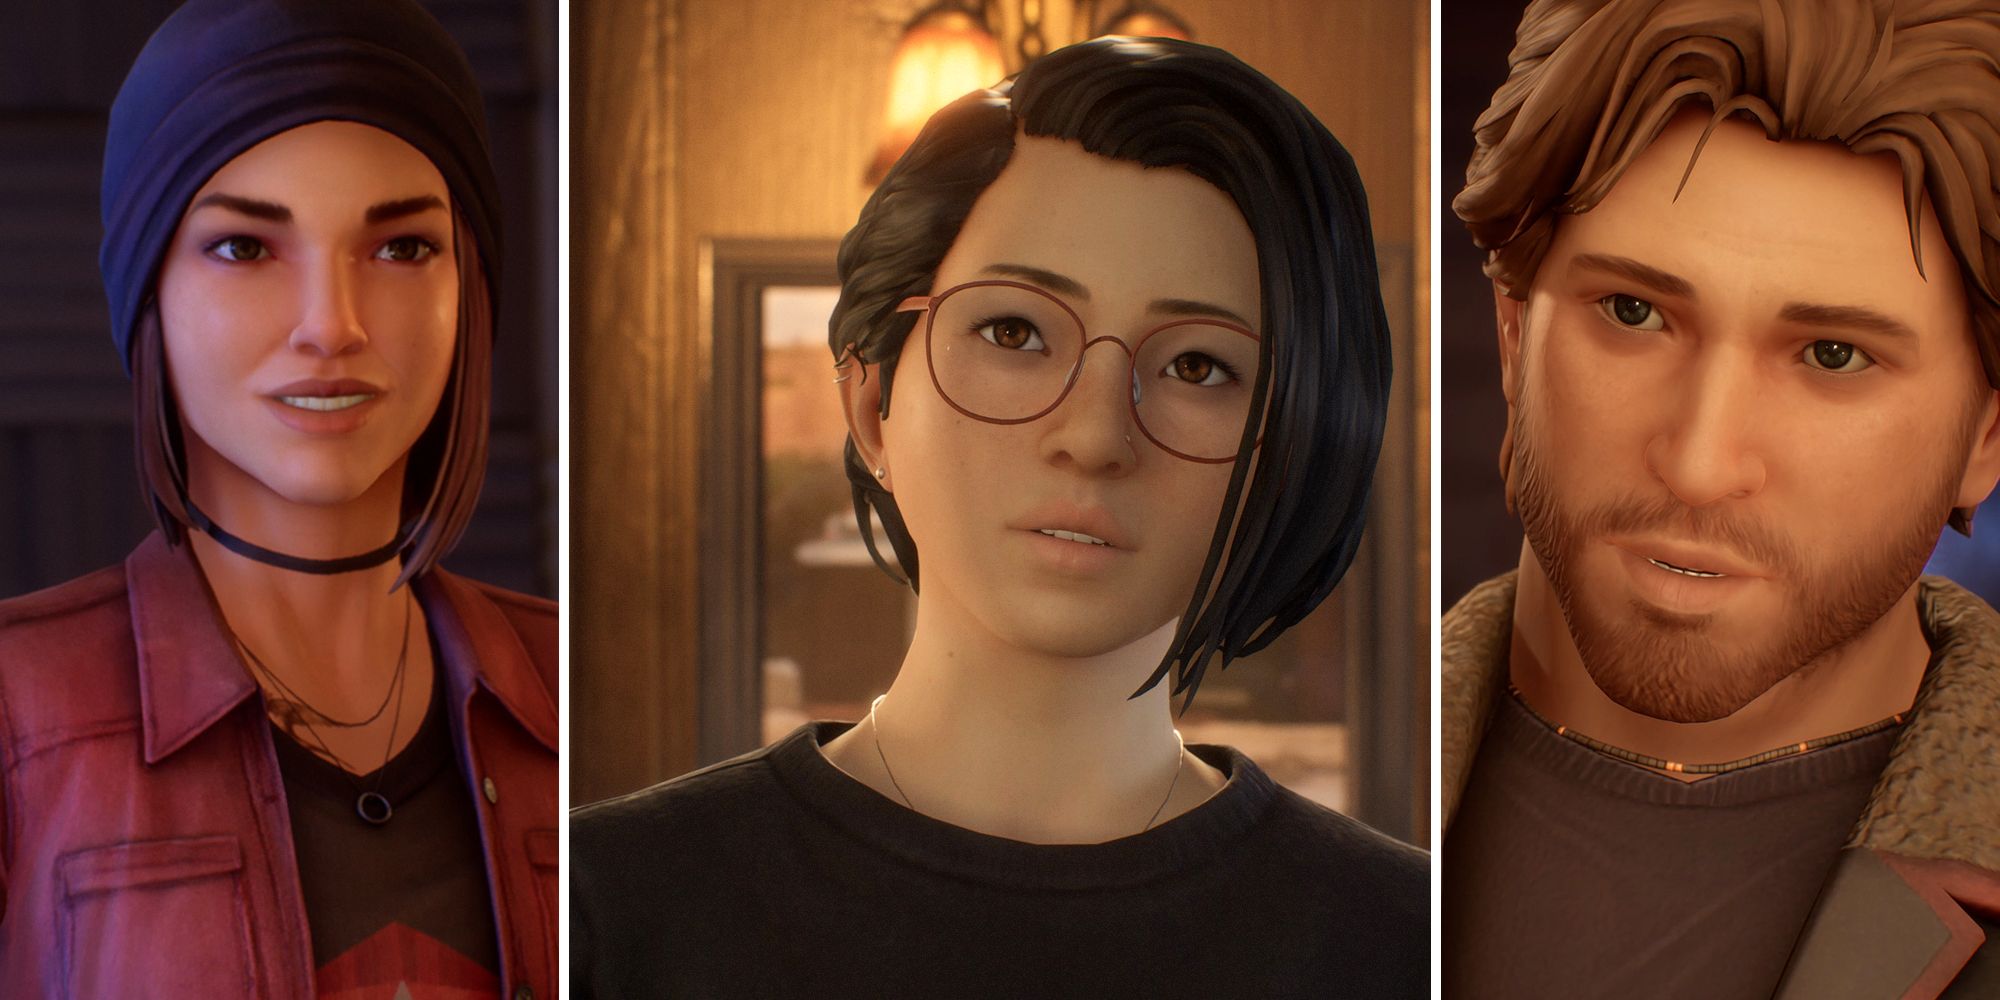 Characters from Life Is Strange: True Colors. Steph is on the left, Alex in the middle, and Ryan on the right.